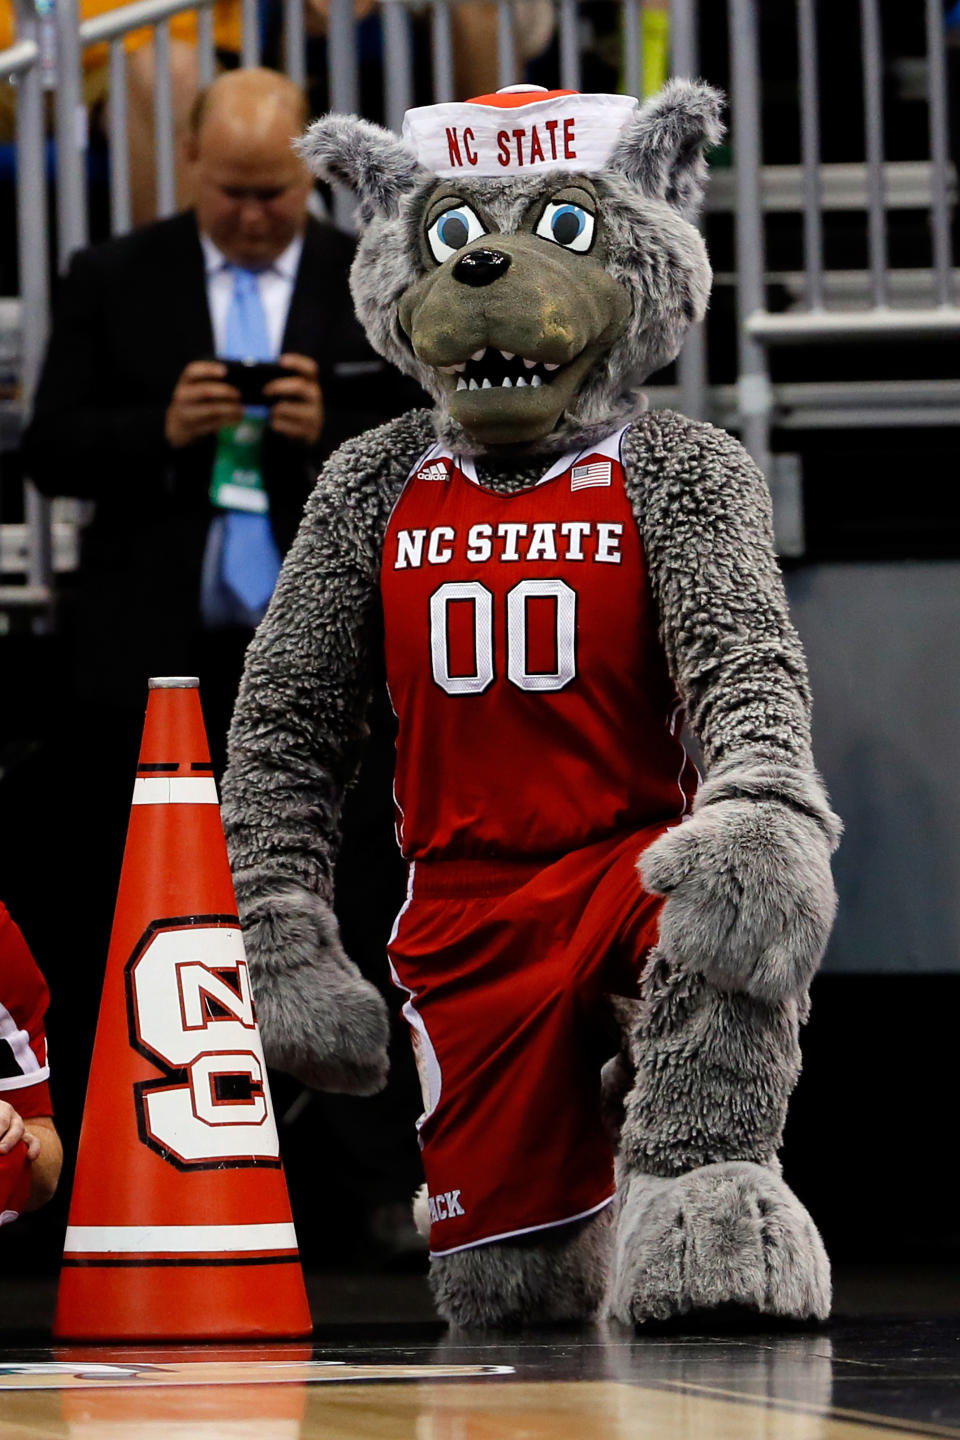 ORLANDO, FL - MARCH 20:  North Carolina State Wolfpack mascot cheers against the Saint Louis Billikens during the second round of the 2014 NCAA Men's Basketball Tournament at Amway Center on March 20, 2014 in Orlando, Florida.  (Photo by Kevin C. Cox/Getty Images)